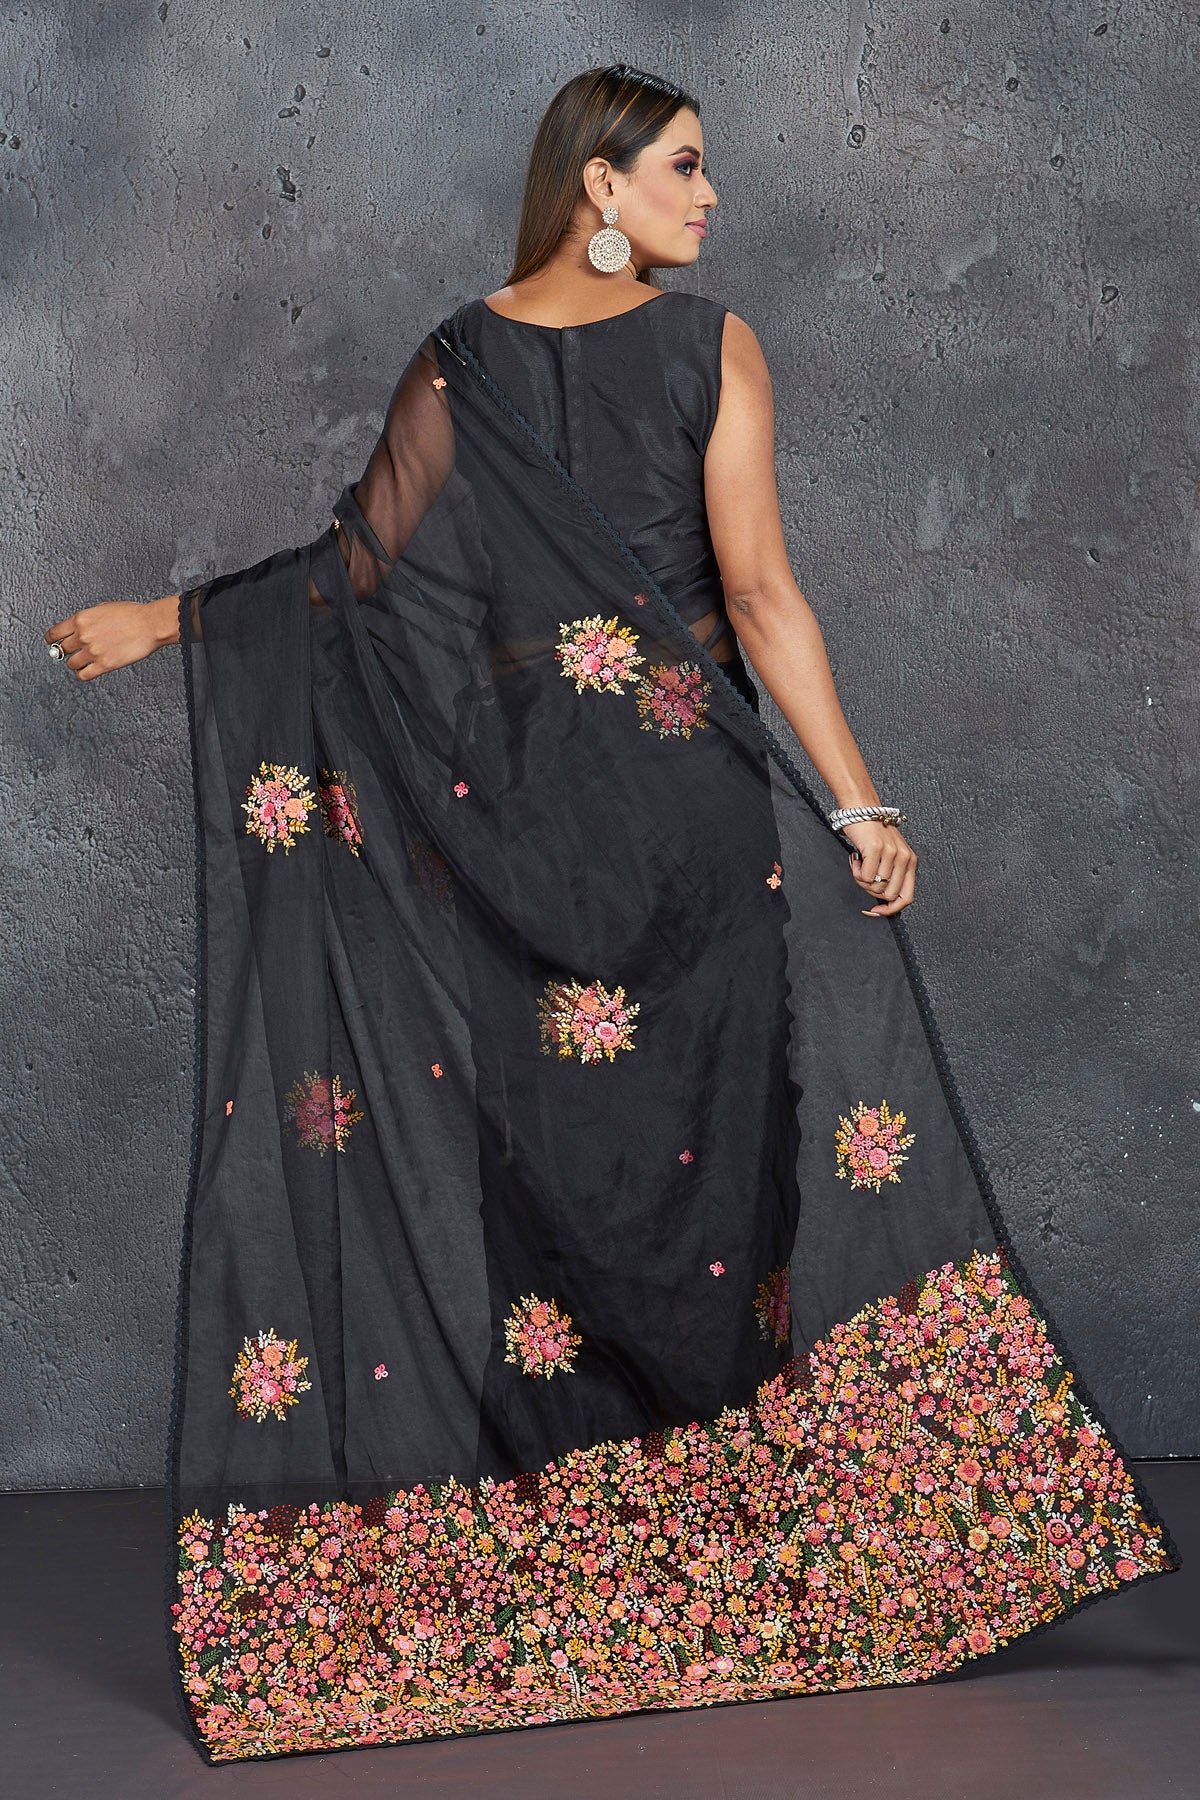 Buy stunning black organza saree online in USA with French knot embroidery. Keep your ethnic wardrobe up to date with latest designer sarees, pure silk sarees, handwoven sarees, tussar silk sarees, embroidered sarees, Paithani sarees from Pure Elegance Indian saree store in USA.-black